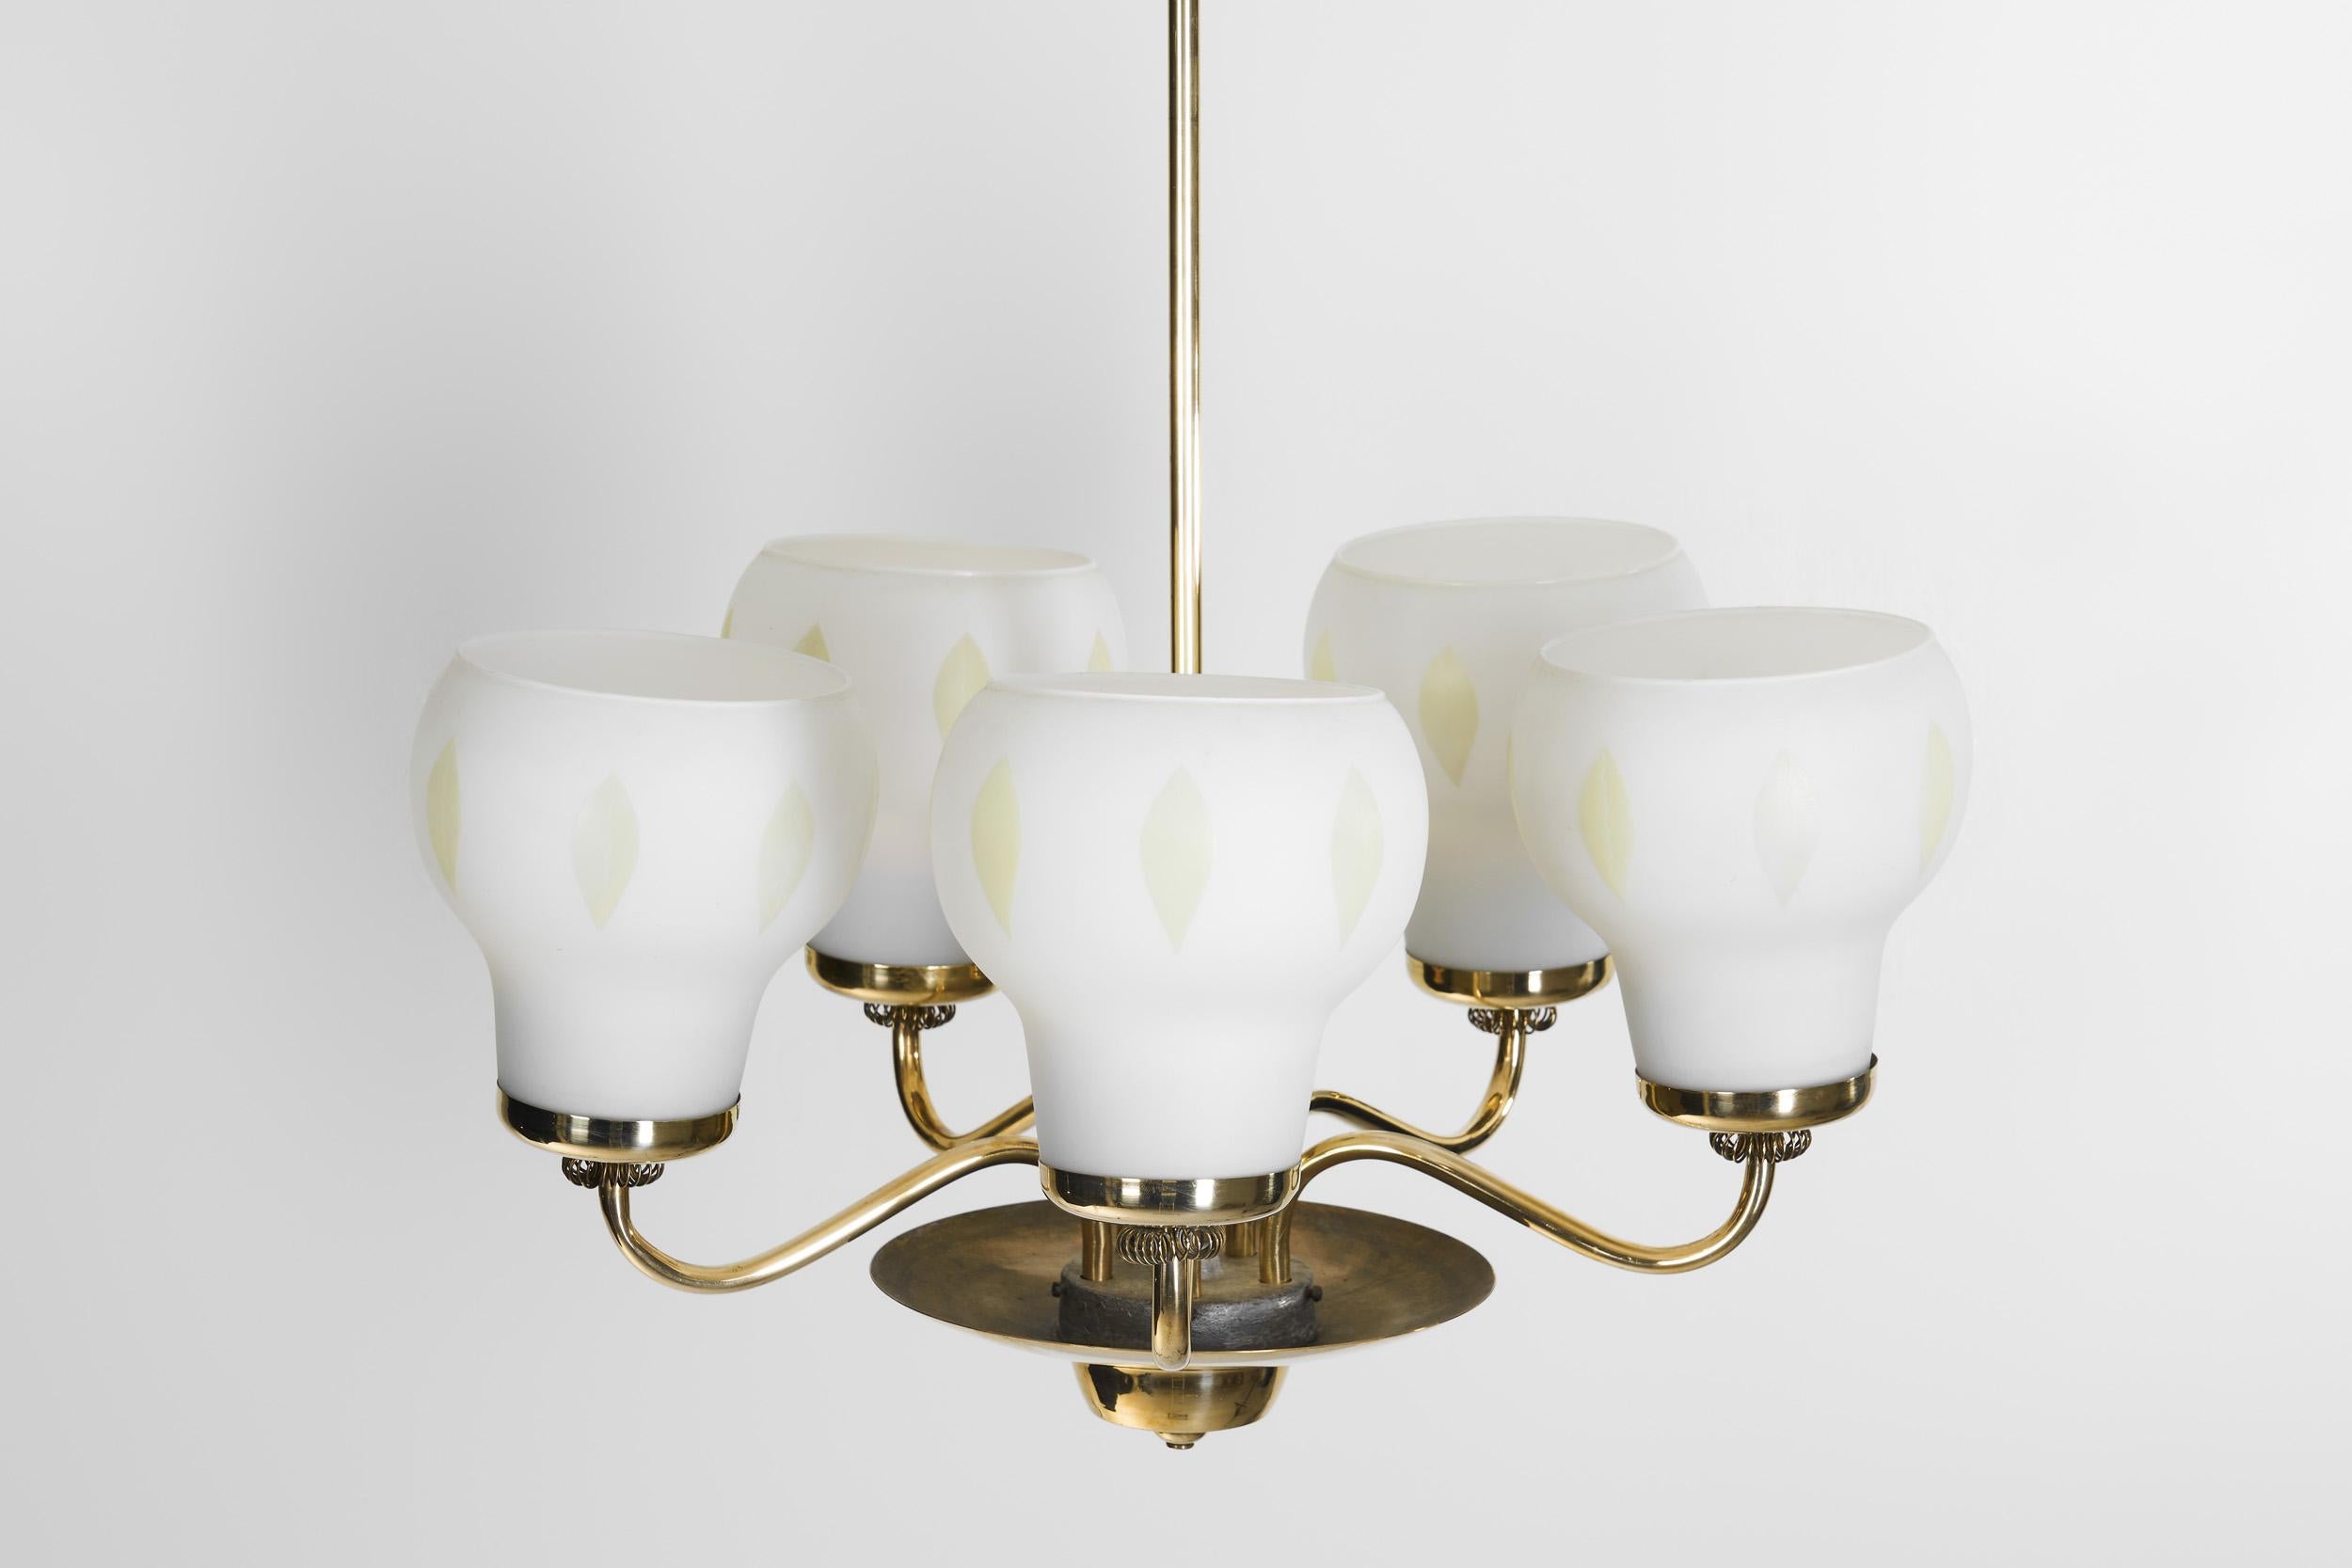 Finnish Brass and Opal Glass Chandelier by Saariston Valaisin, Finland ca 1950s For Sale 3